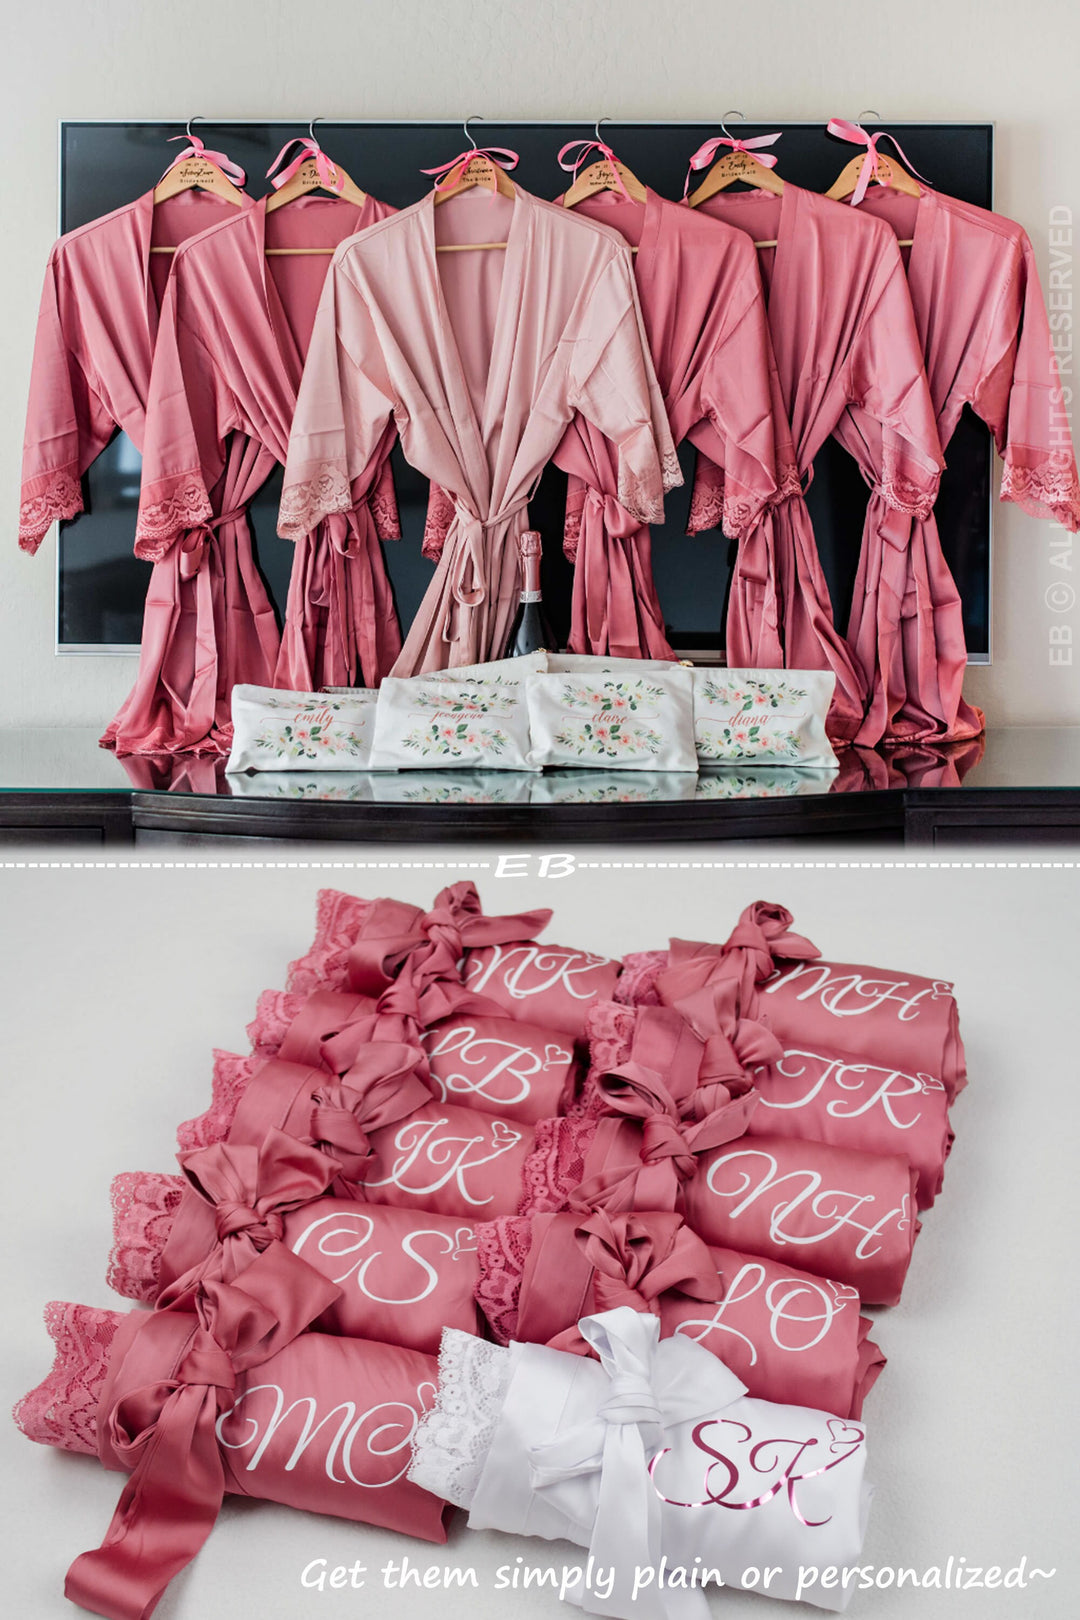 Dusty Rose robes, set of 1,2,3,4,5,6,7,8,9,10,11,12, bridesmaid proposal box, getting ready robes, bachlorette party, plus and child size